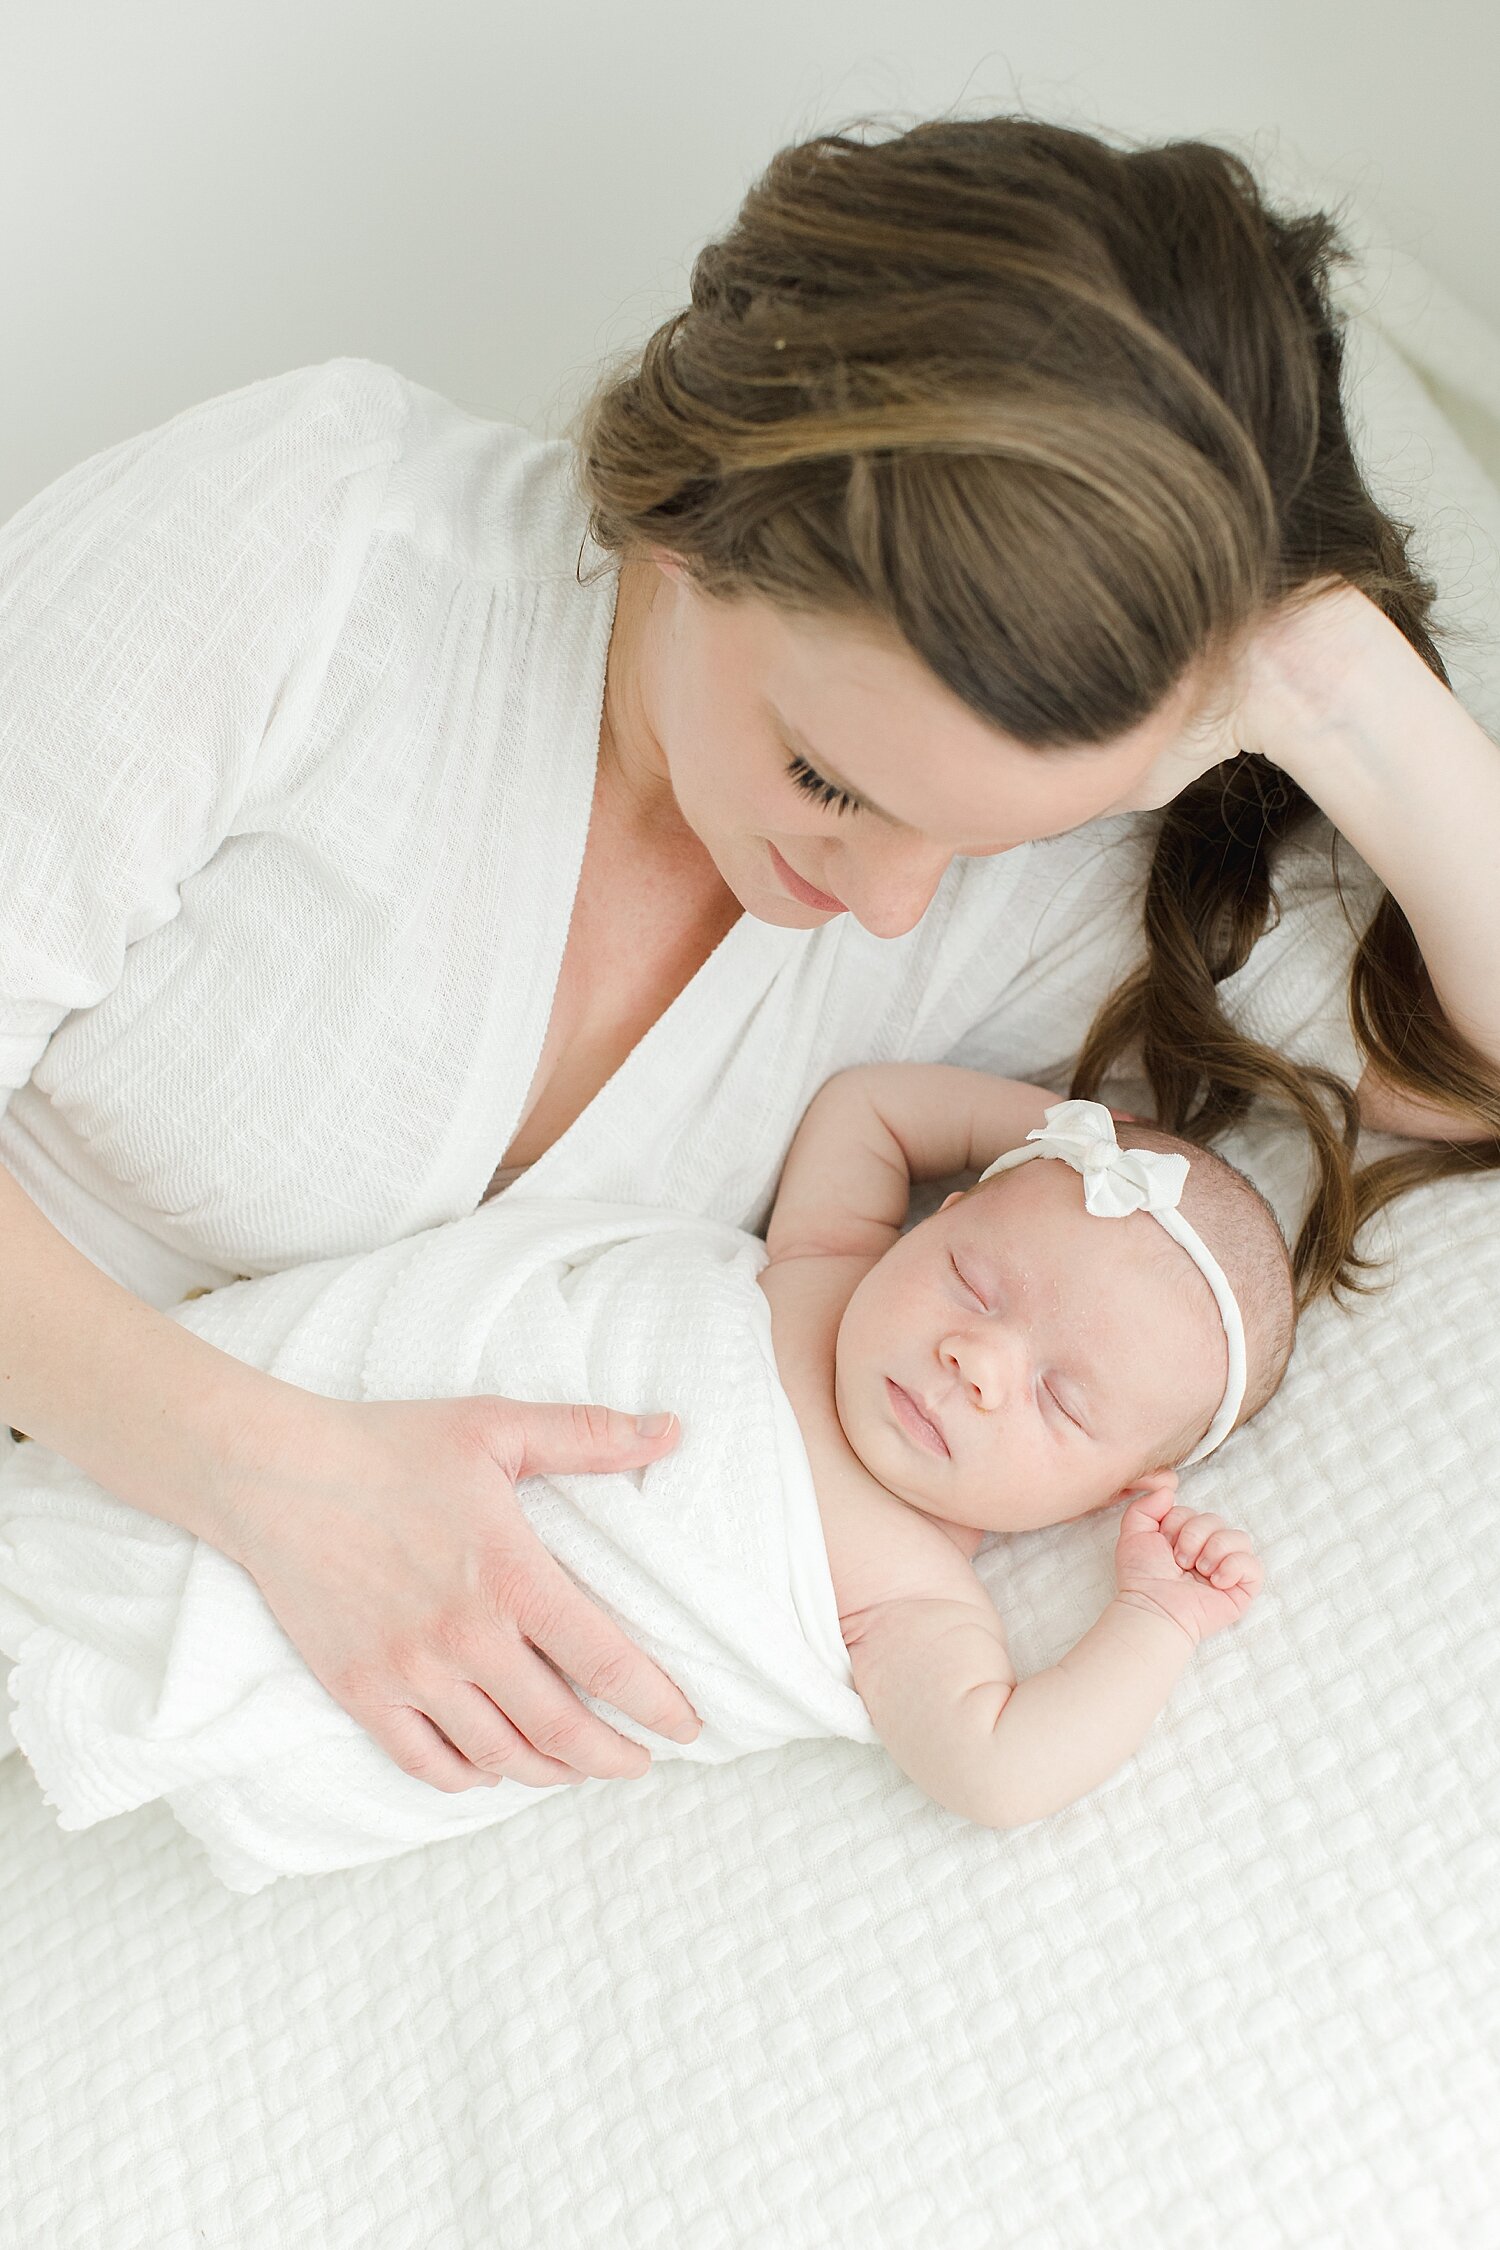 Mom laying with baby girl in studio in Westport, CT | Photo by Kristin Wood Photography